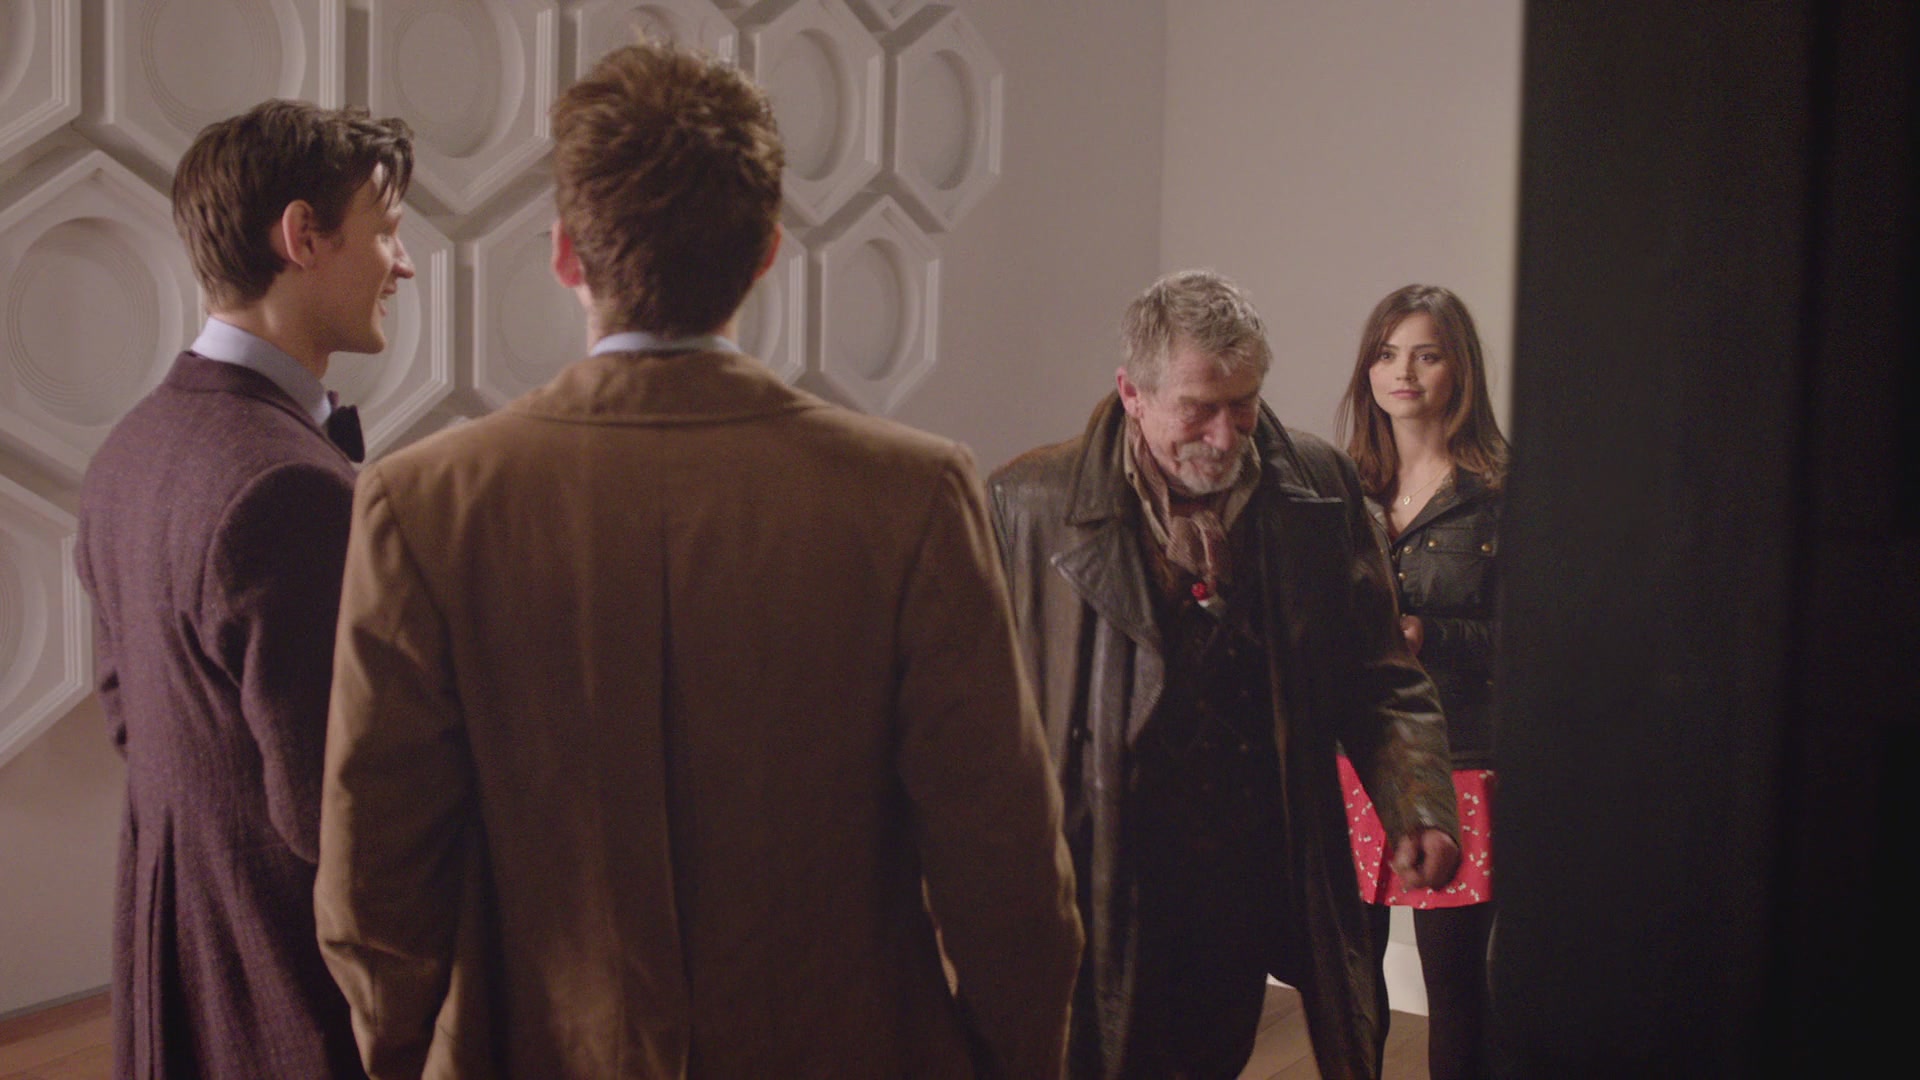 DayOfTheDoctor-Caps-1326.jpg